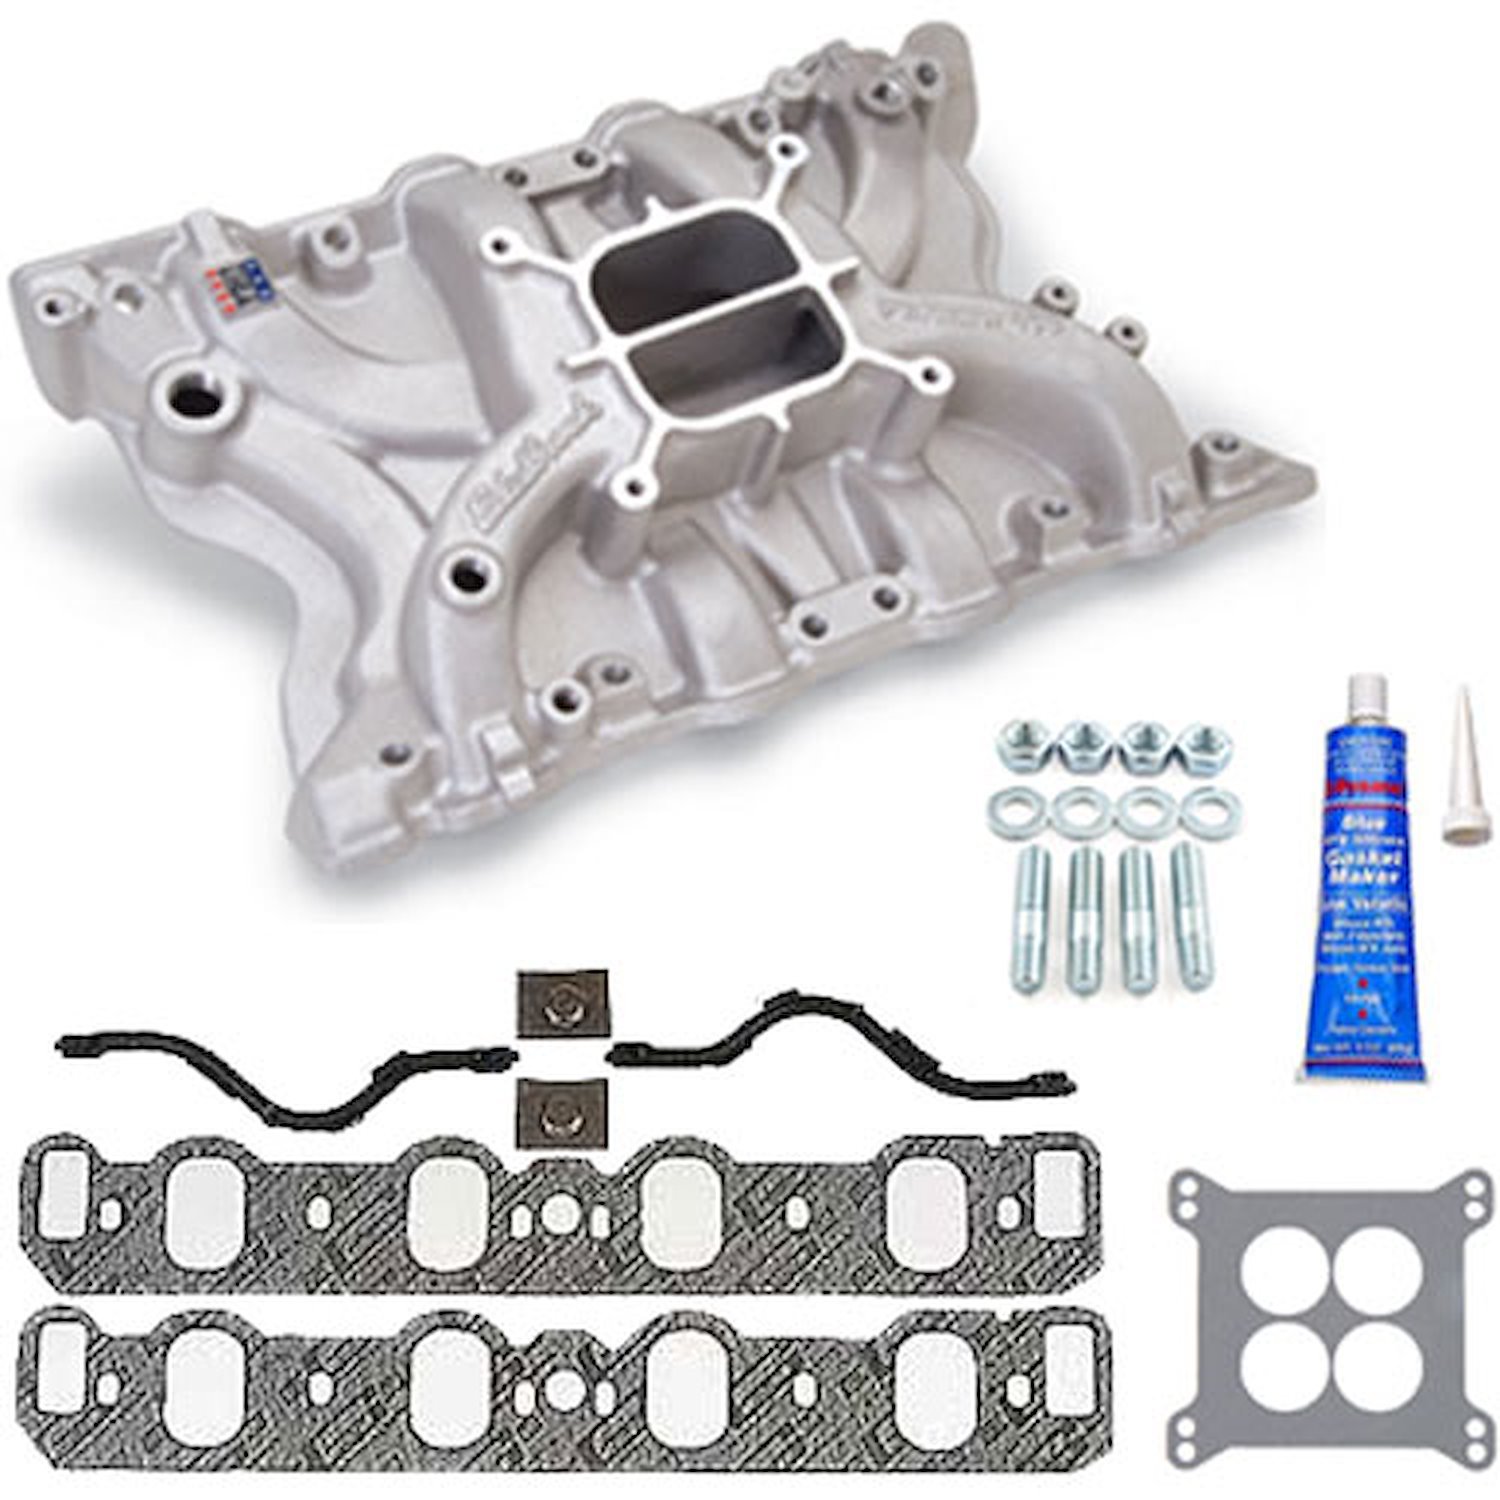 Performer 400 Non-EGR Ford Intake Manifold with Installation